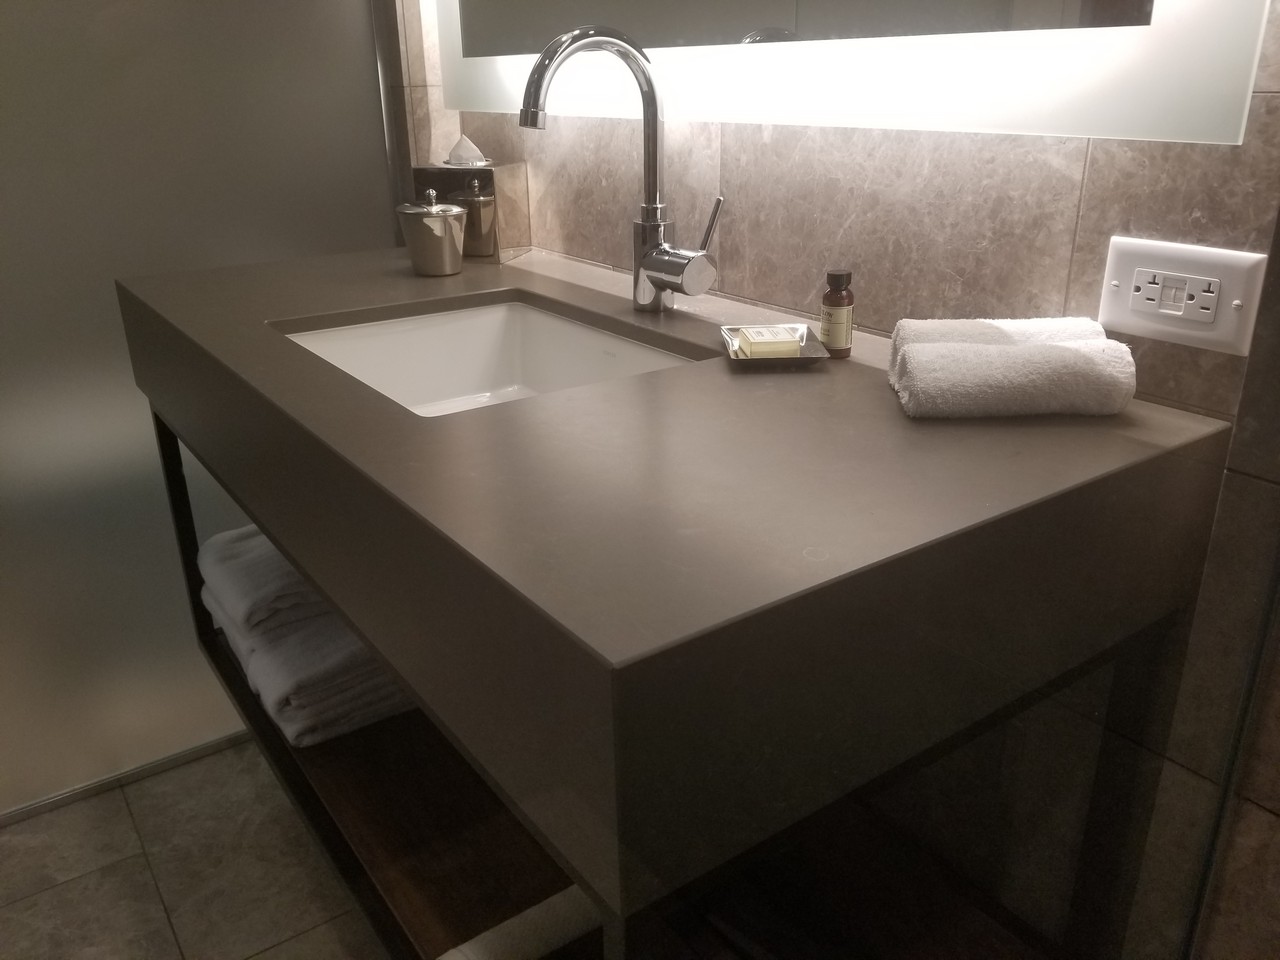 a sink with a faucet and towels on it